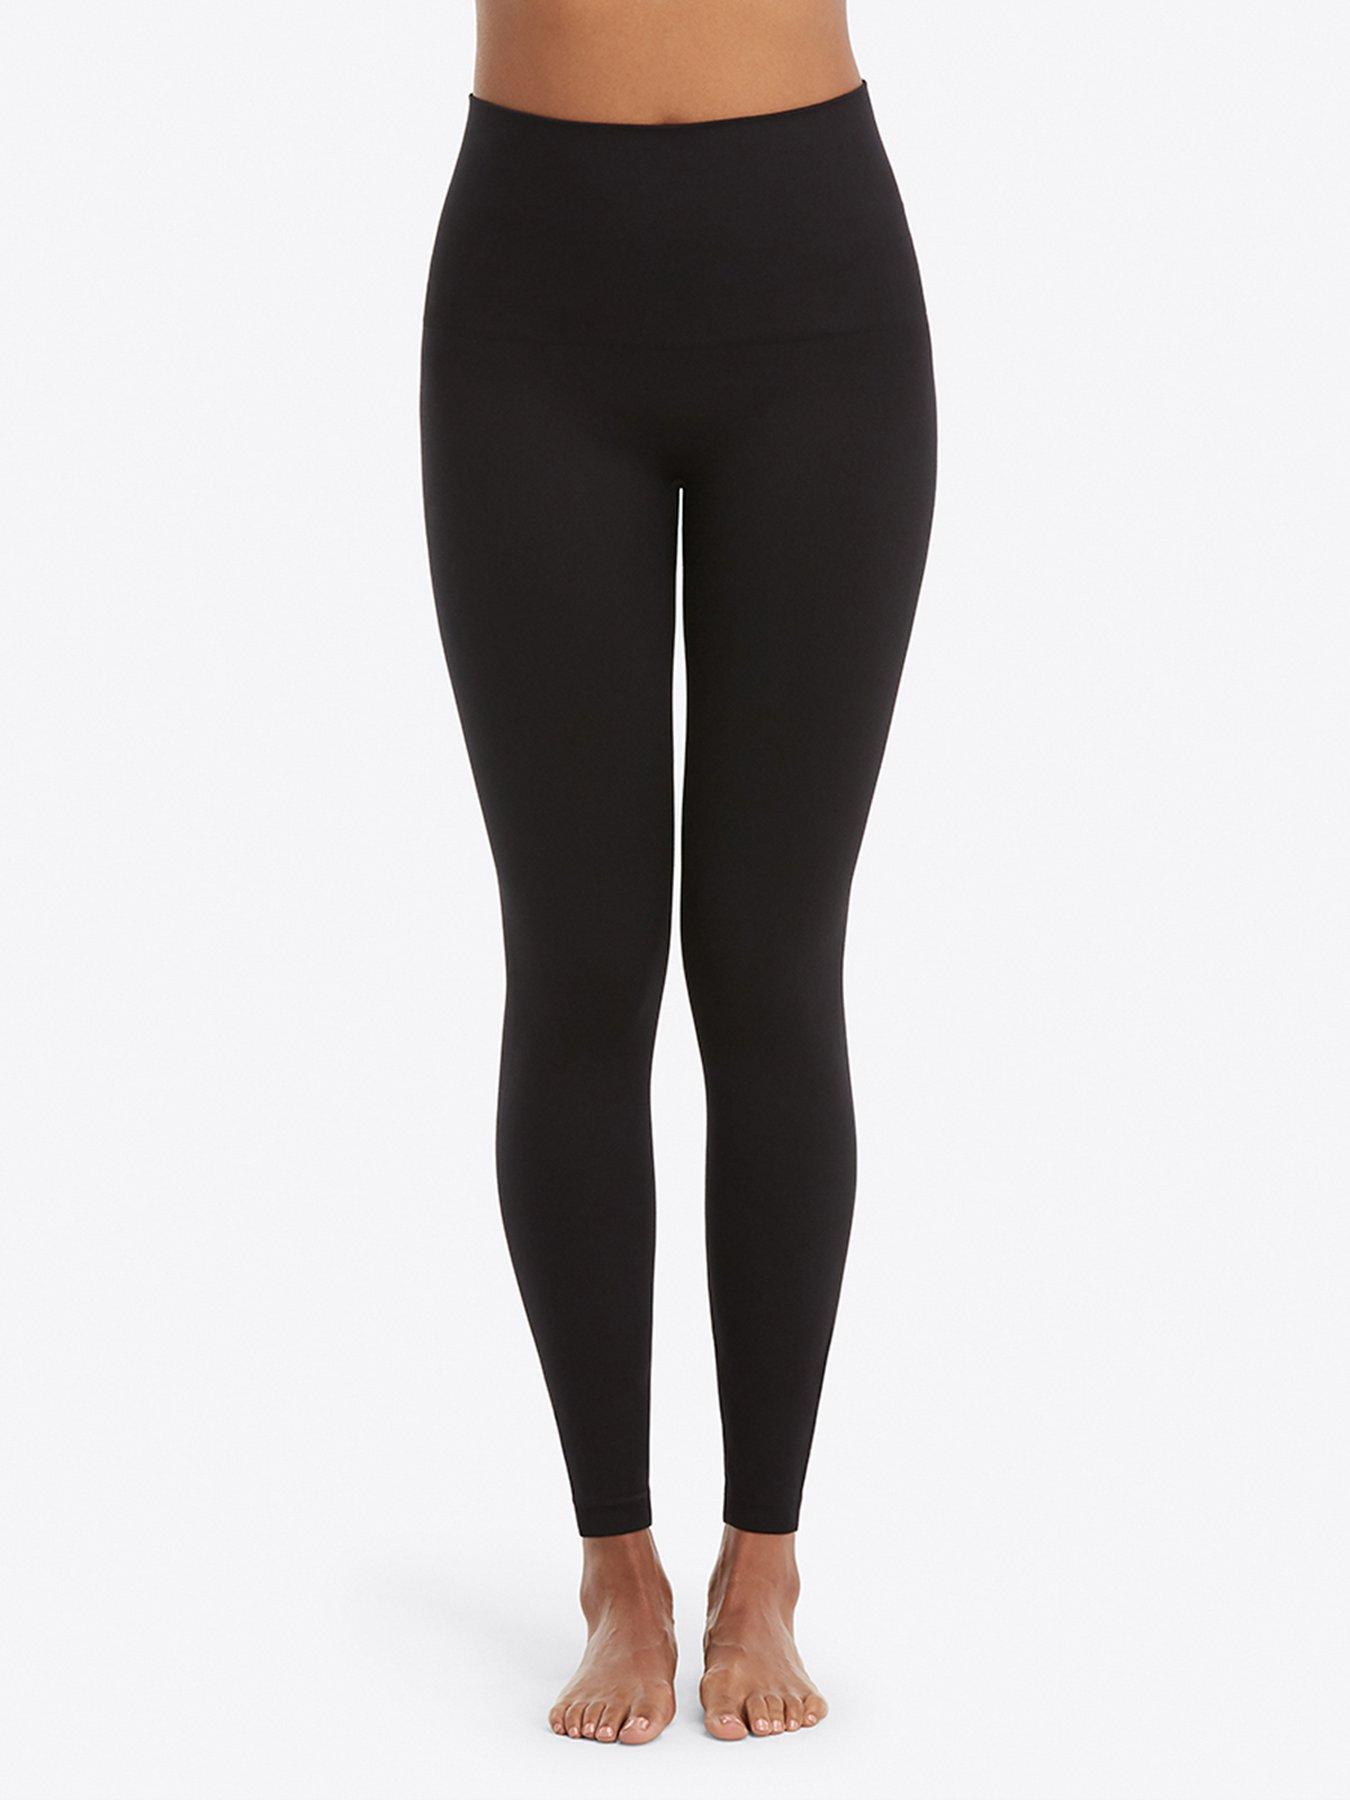 Petition · Return recalled yoga pants to the free market ·